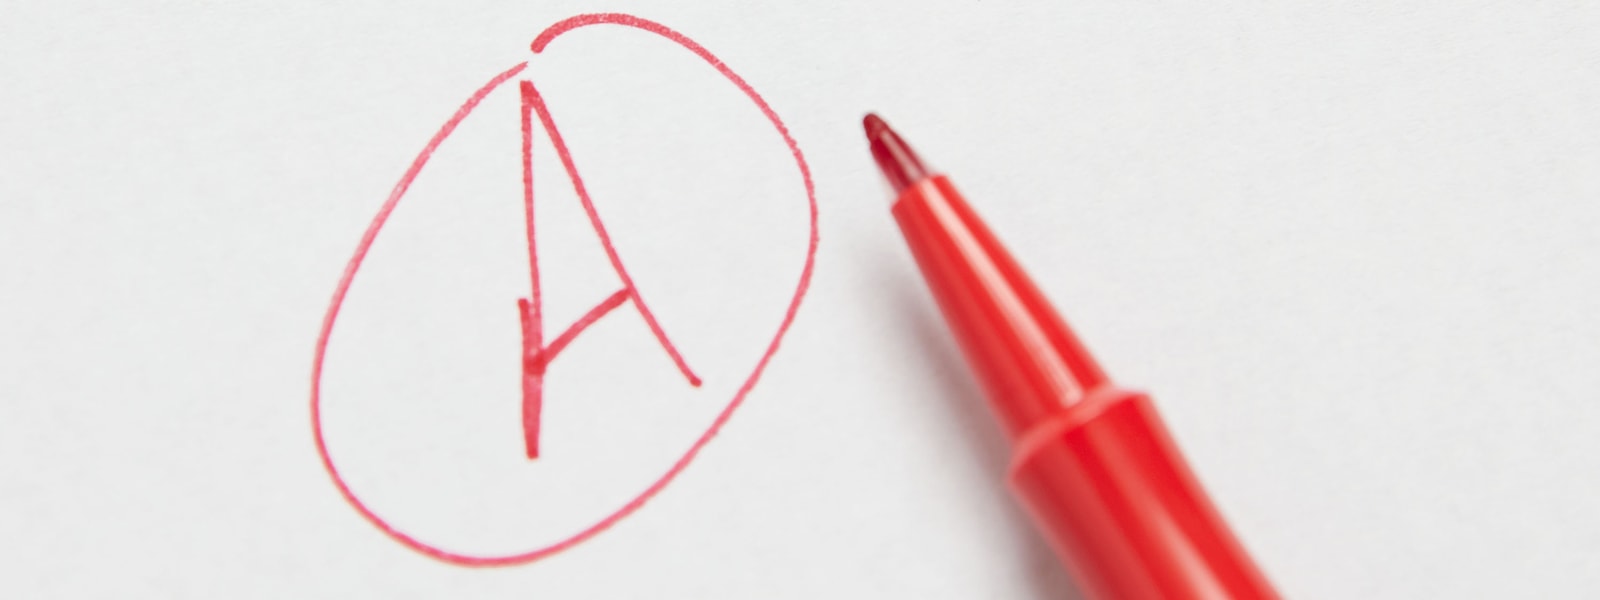 The letter A circled with a red pen